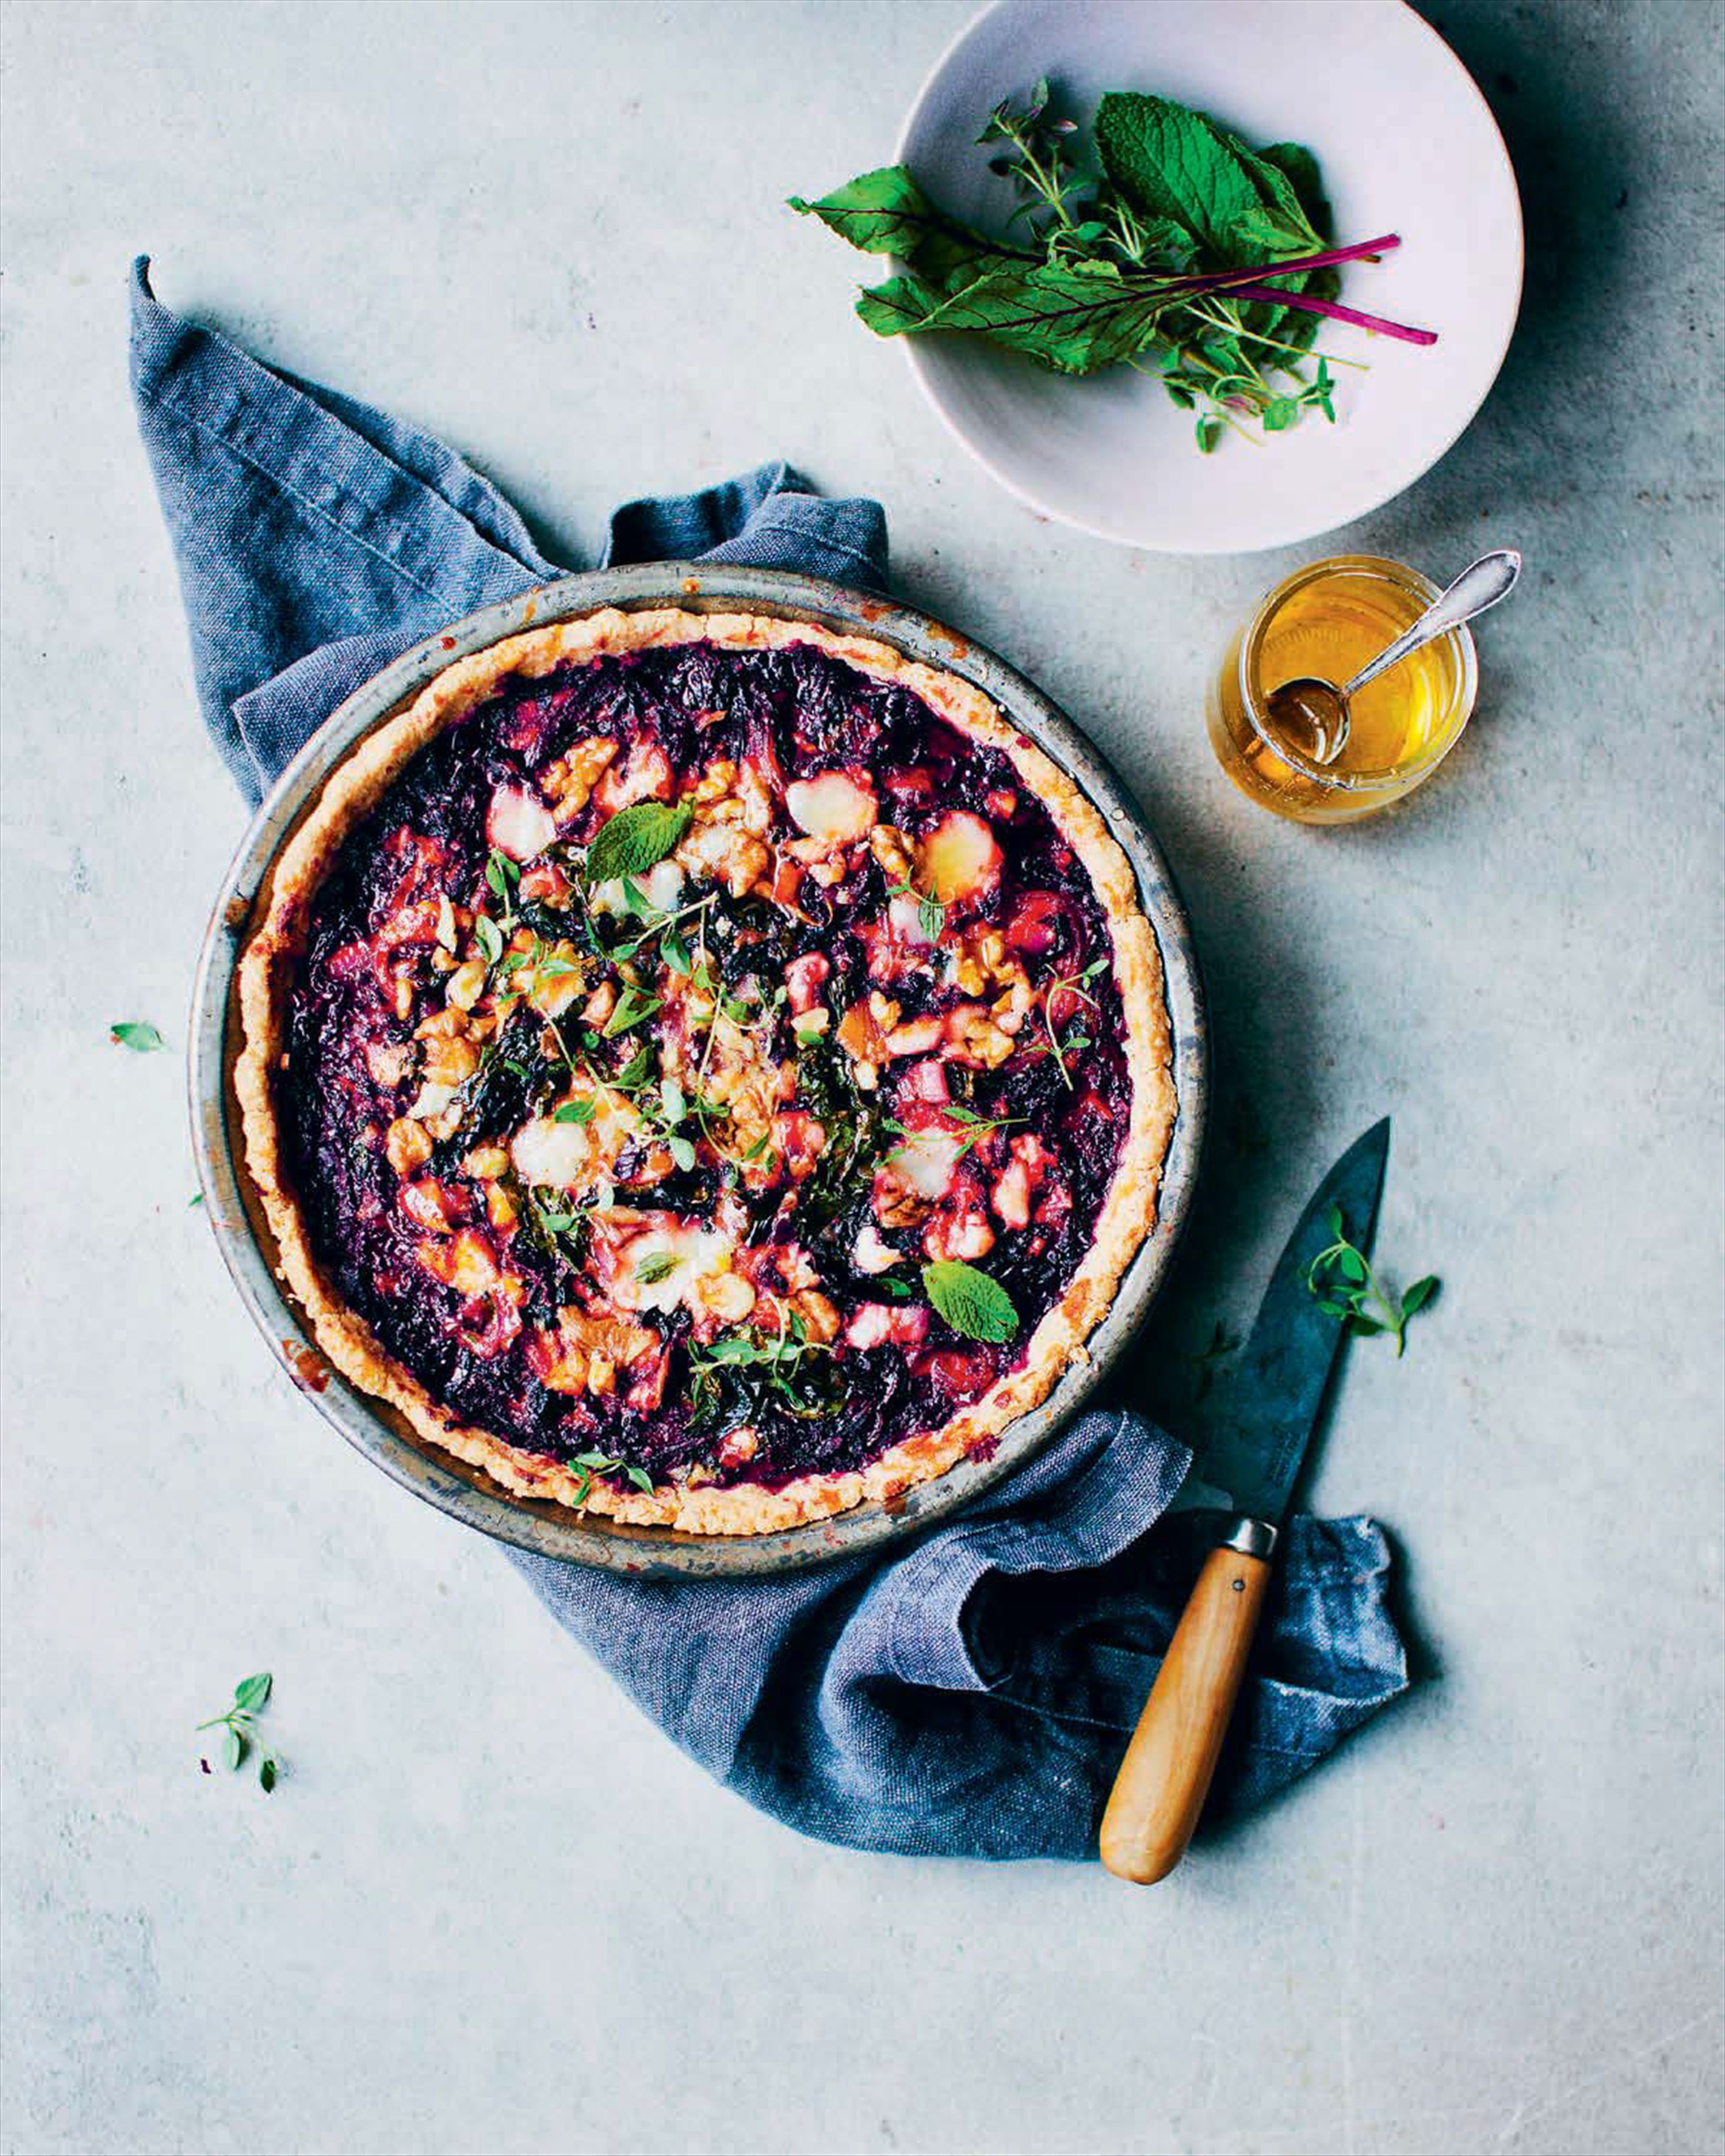 Beetroot and goat’s cheese quiche